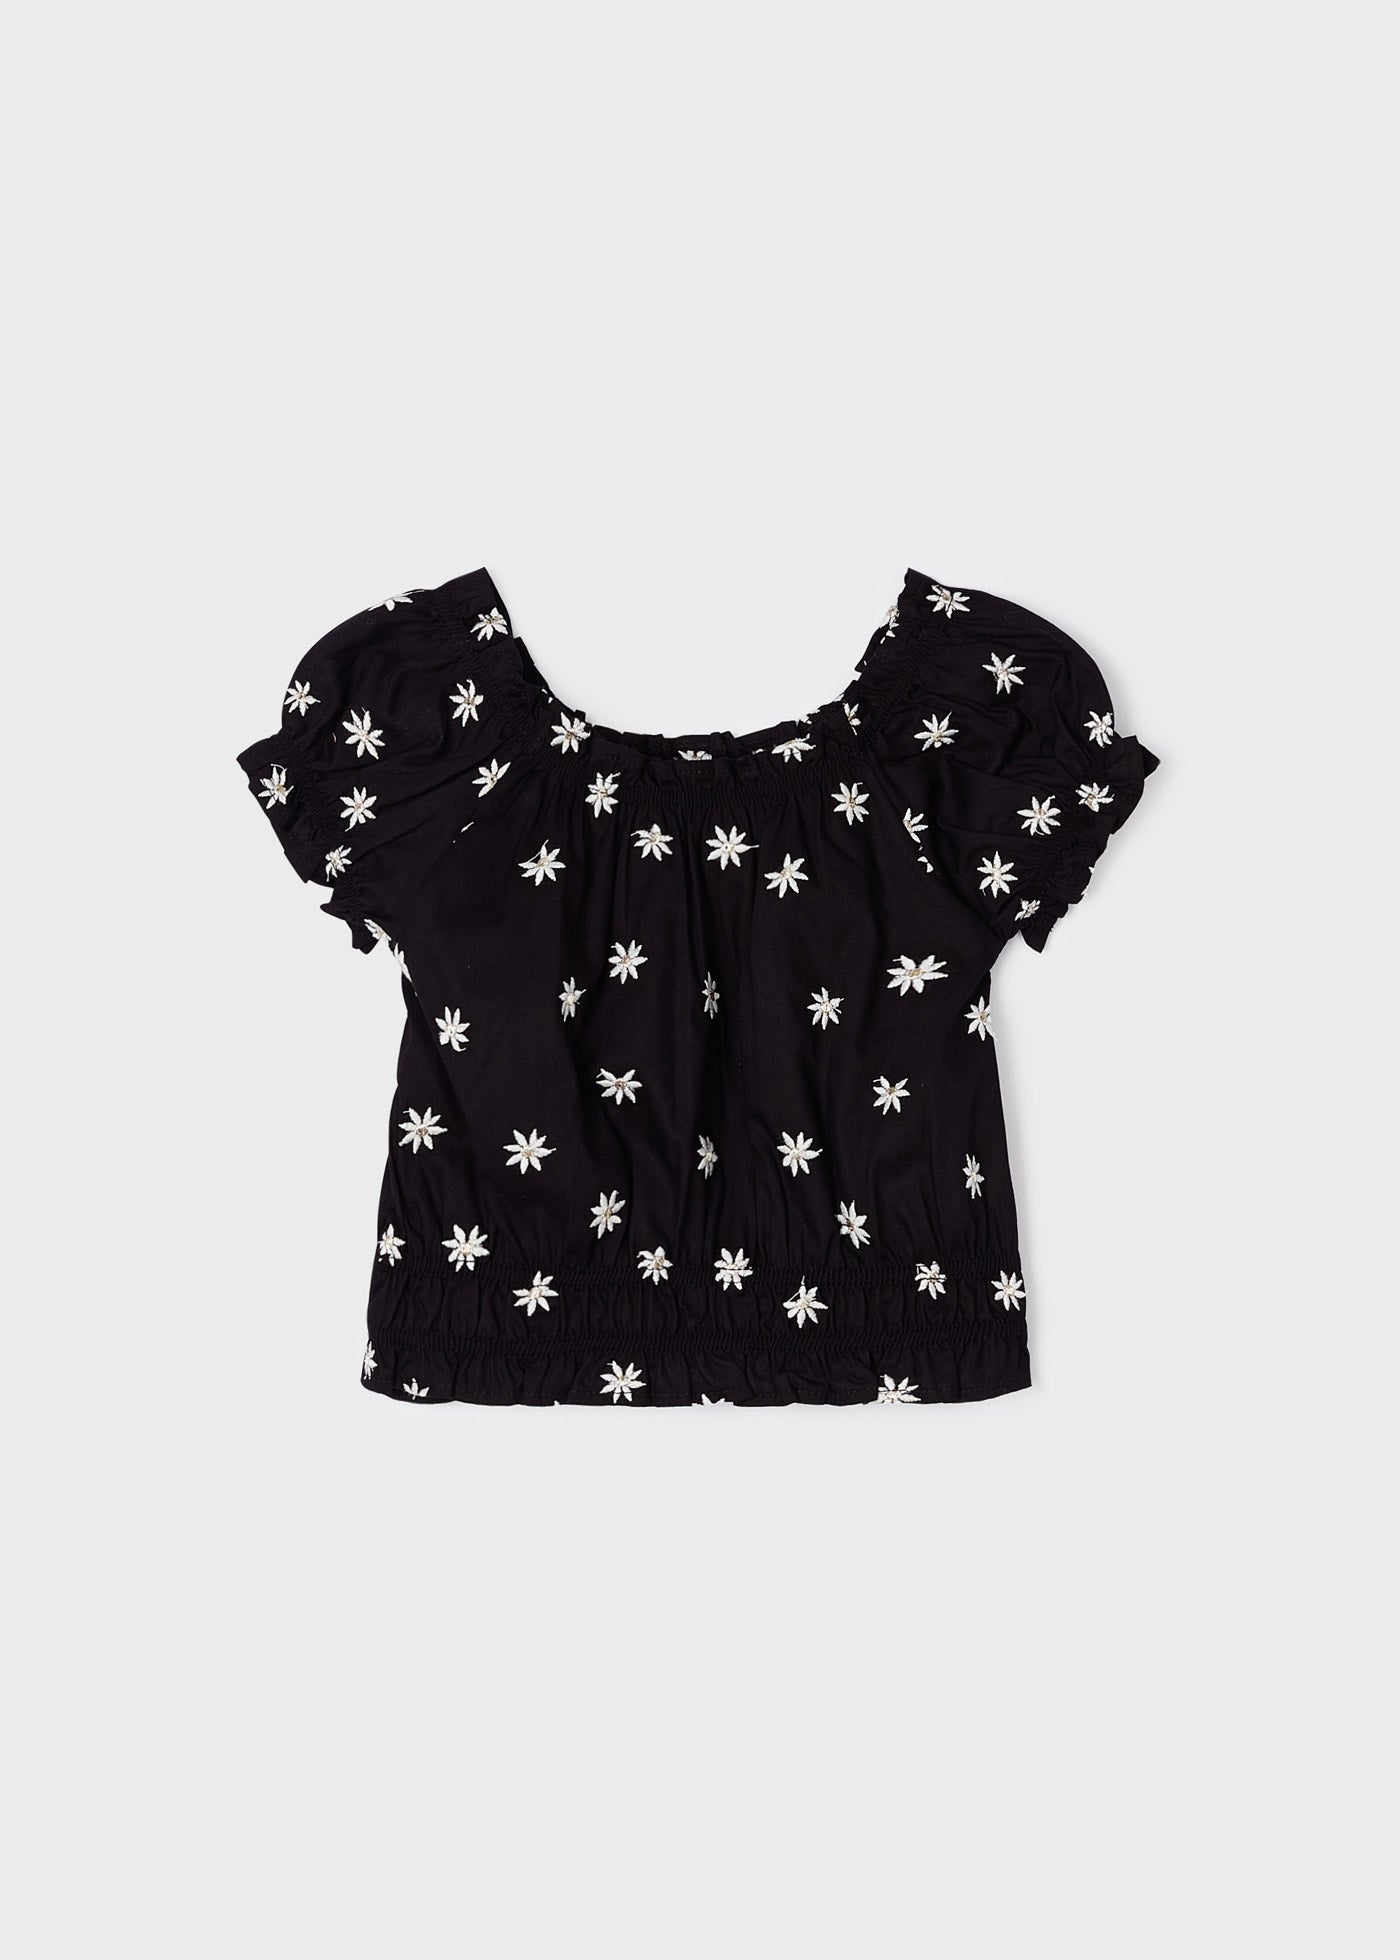 Mayoral Mini S/S Blouse w/Embroidered Flowers _Black 3139-72